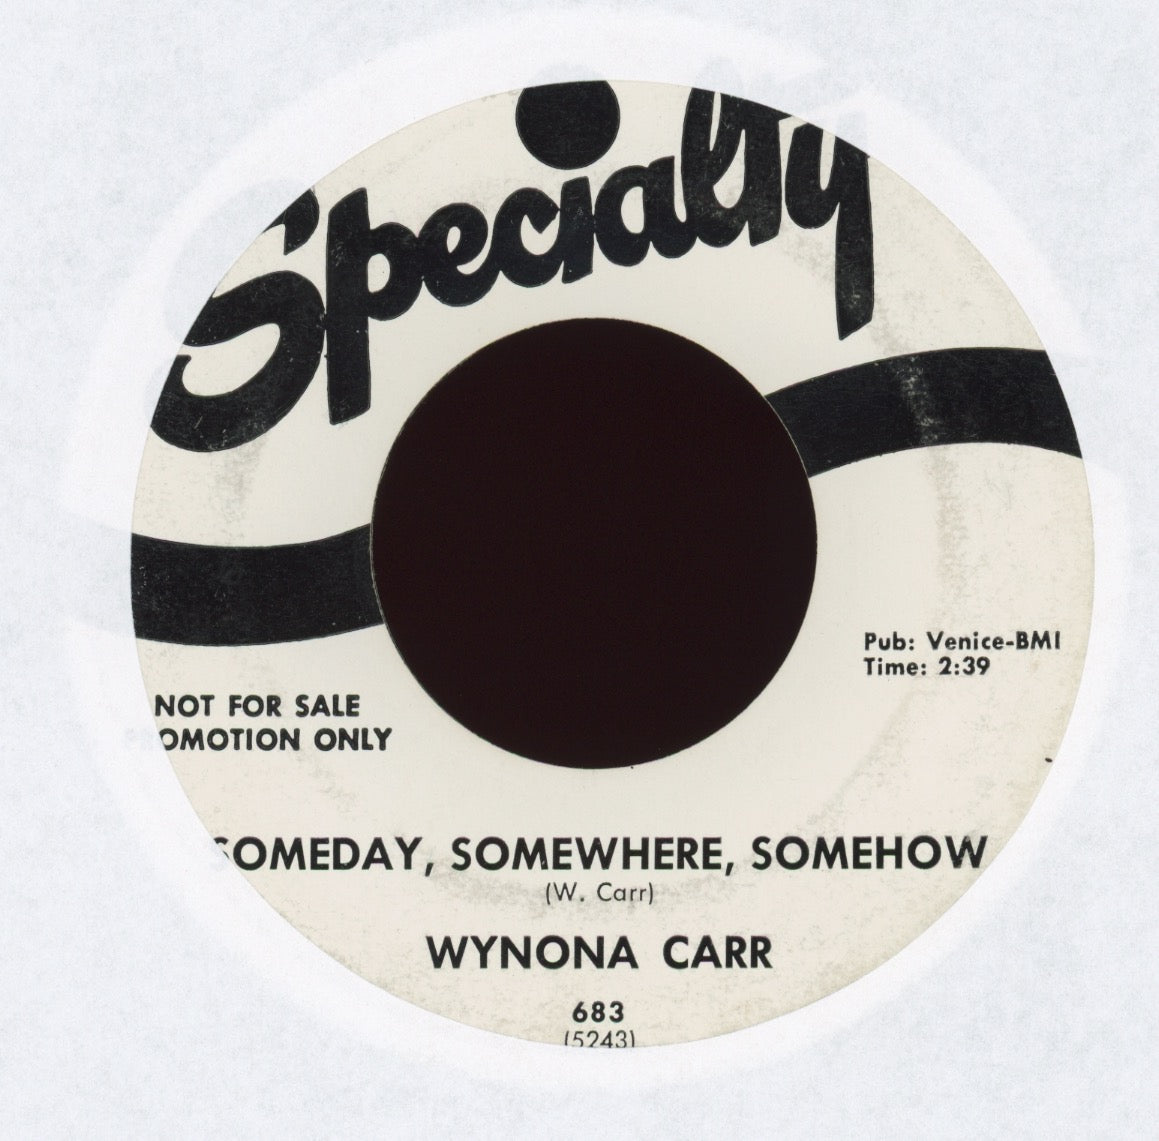 Wynona Carr - Old-Fashioned Love on Specialty Promo